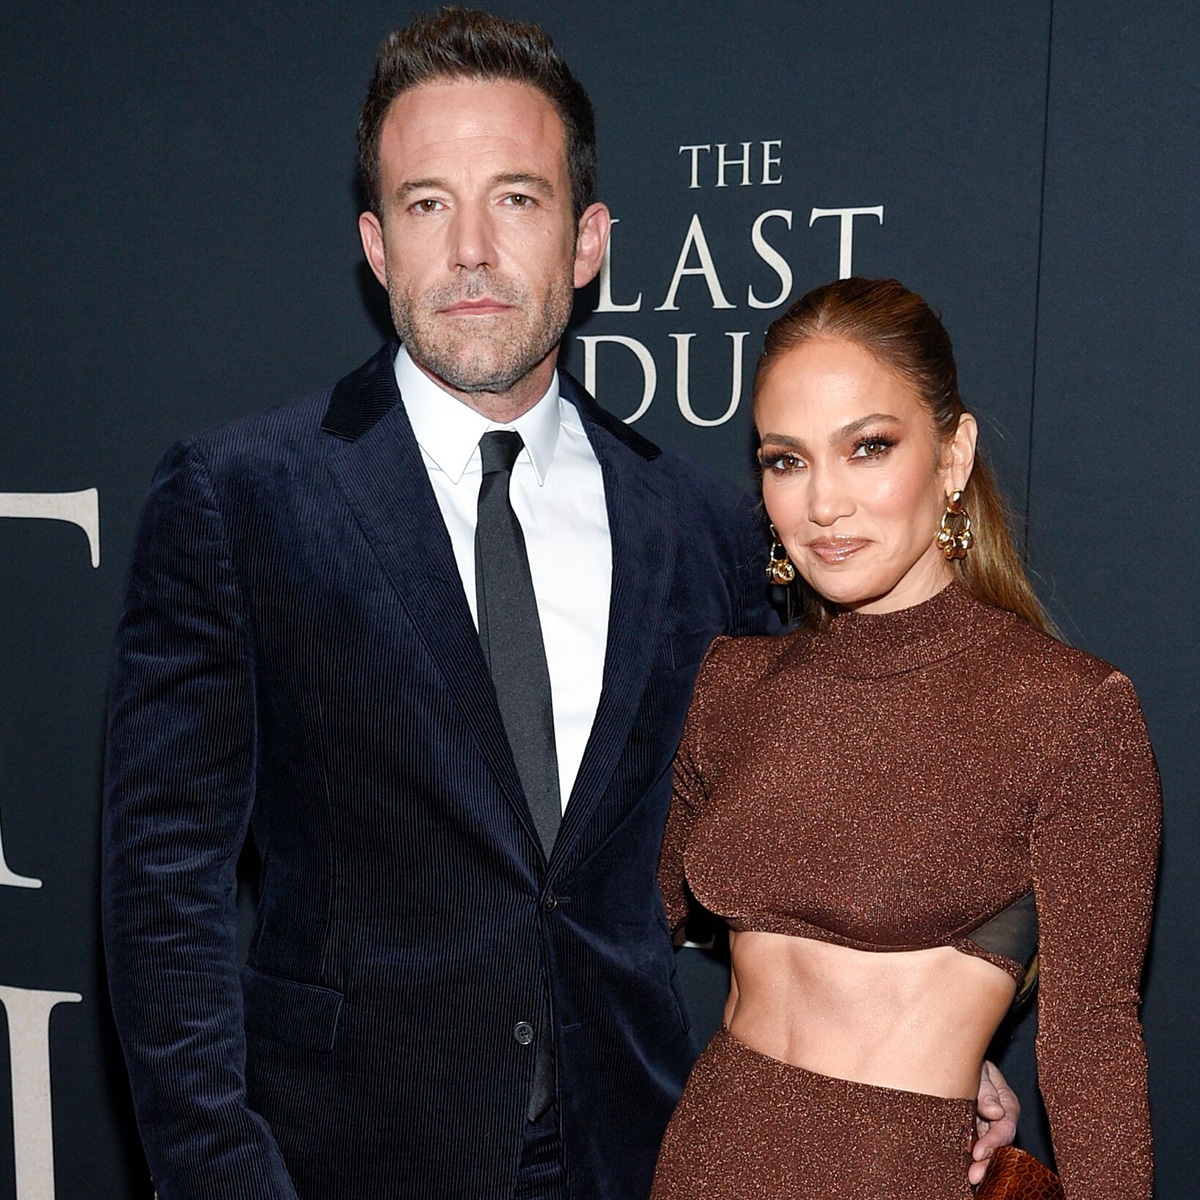 jlo And Ben Affleck Look Smitten As She Supports Him At Premiere E Online